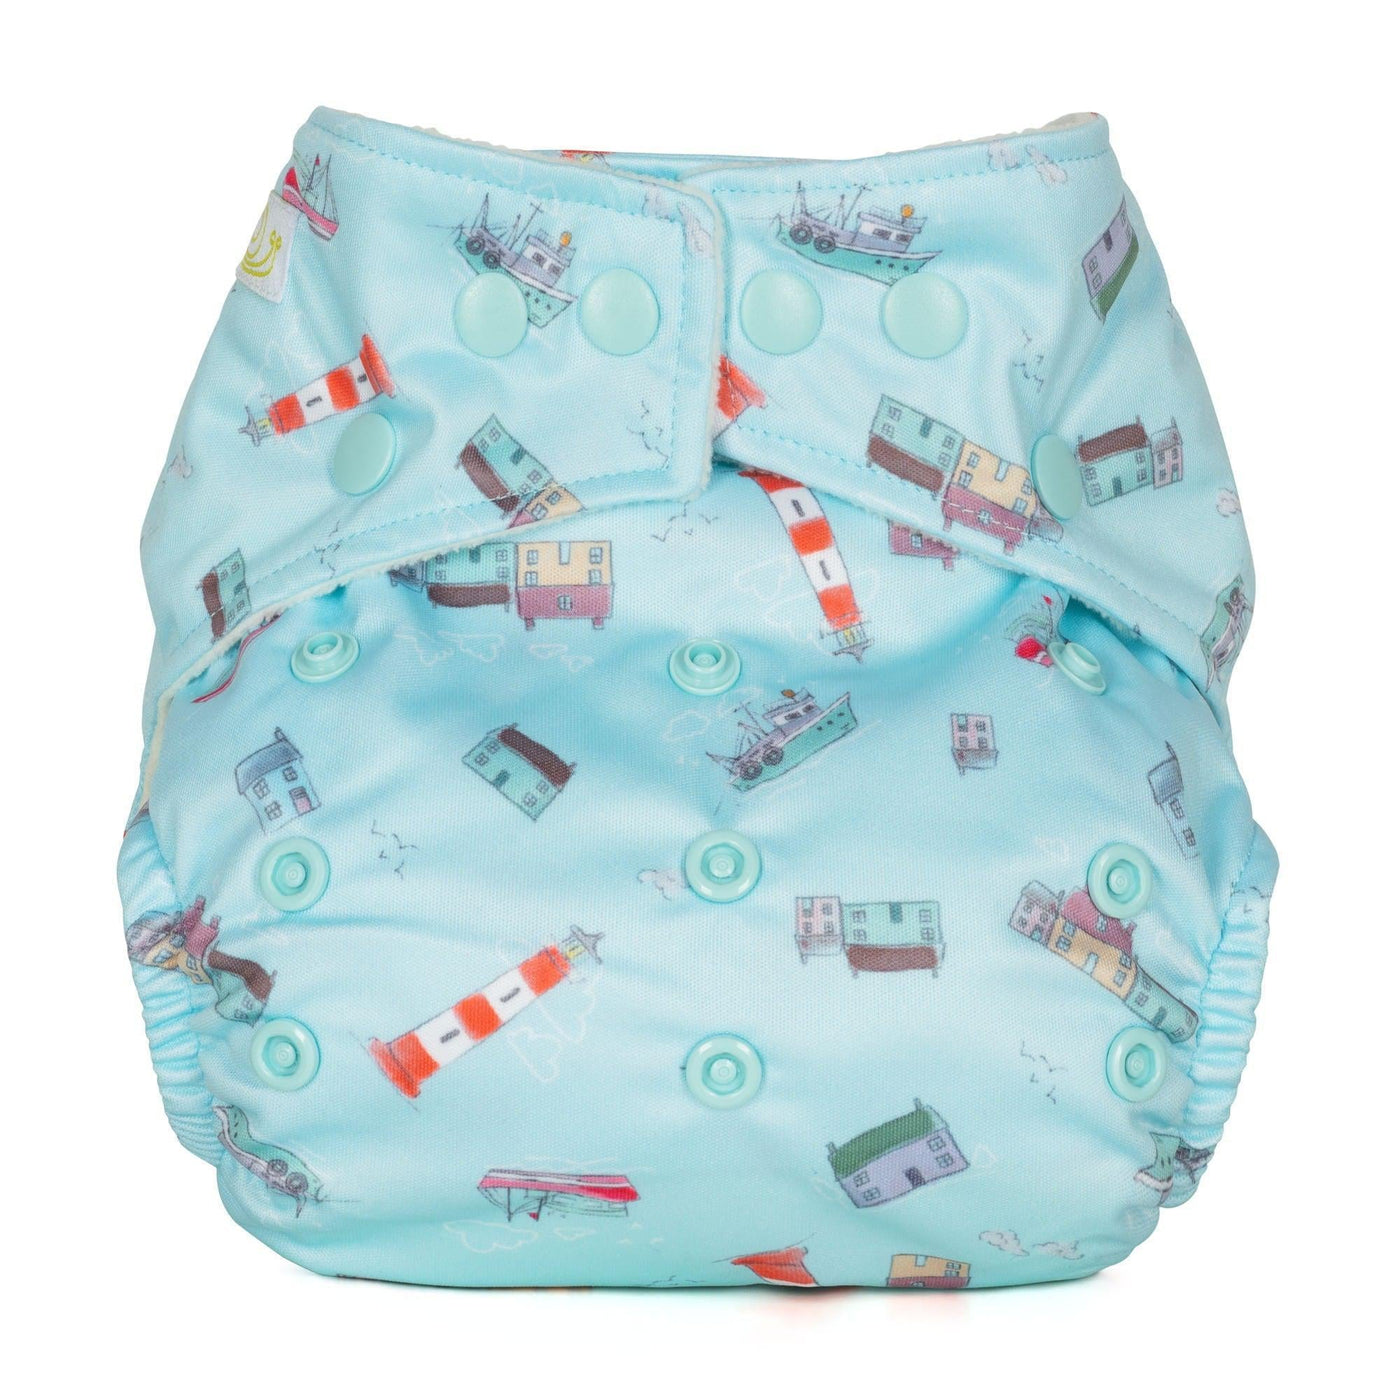 Baba + Boo One Size Reusable Nappy - Harbour